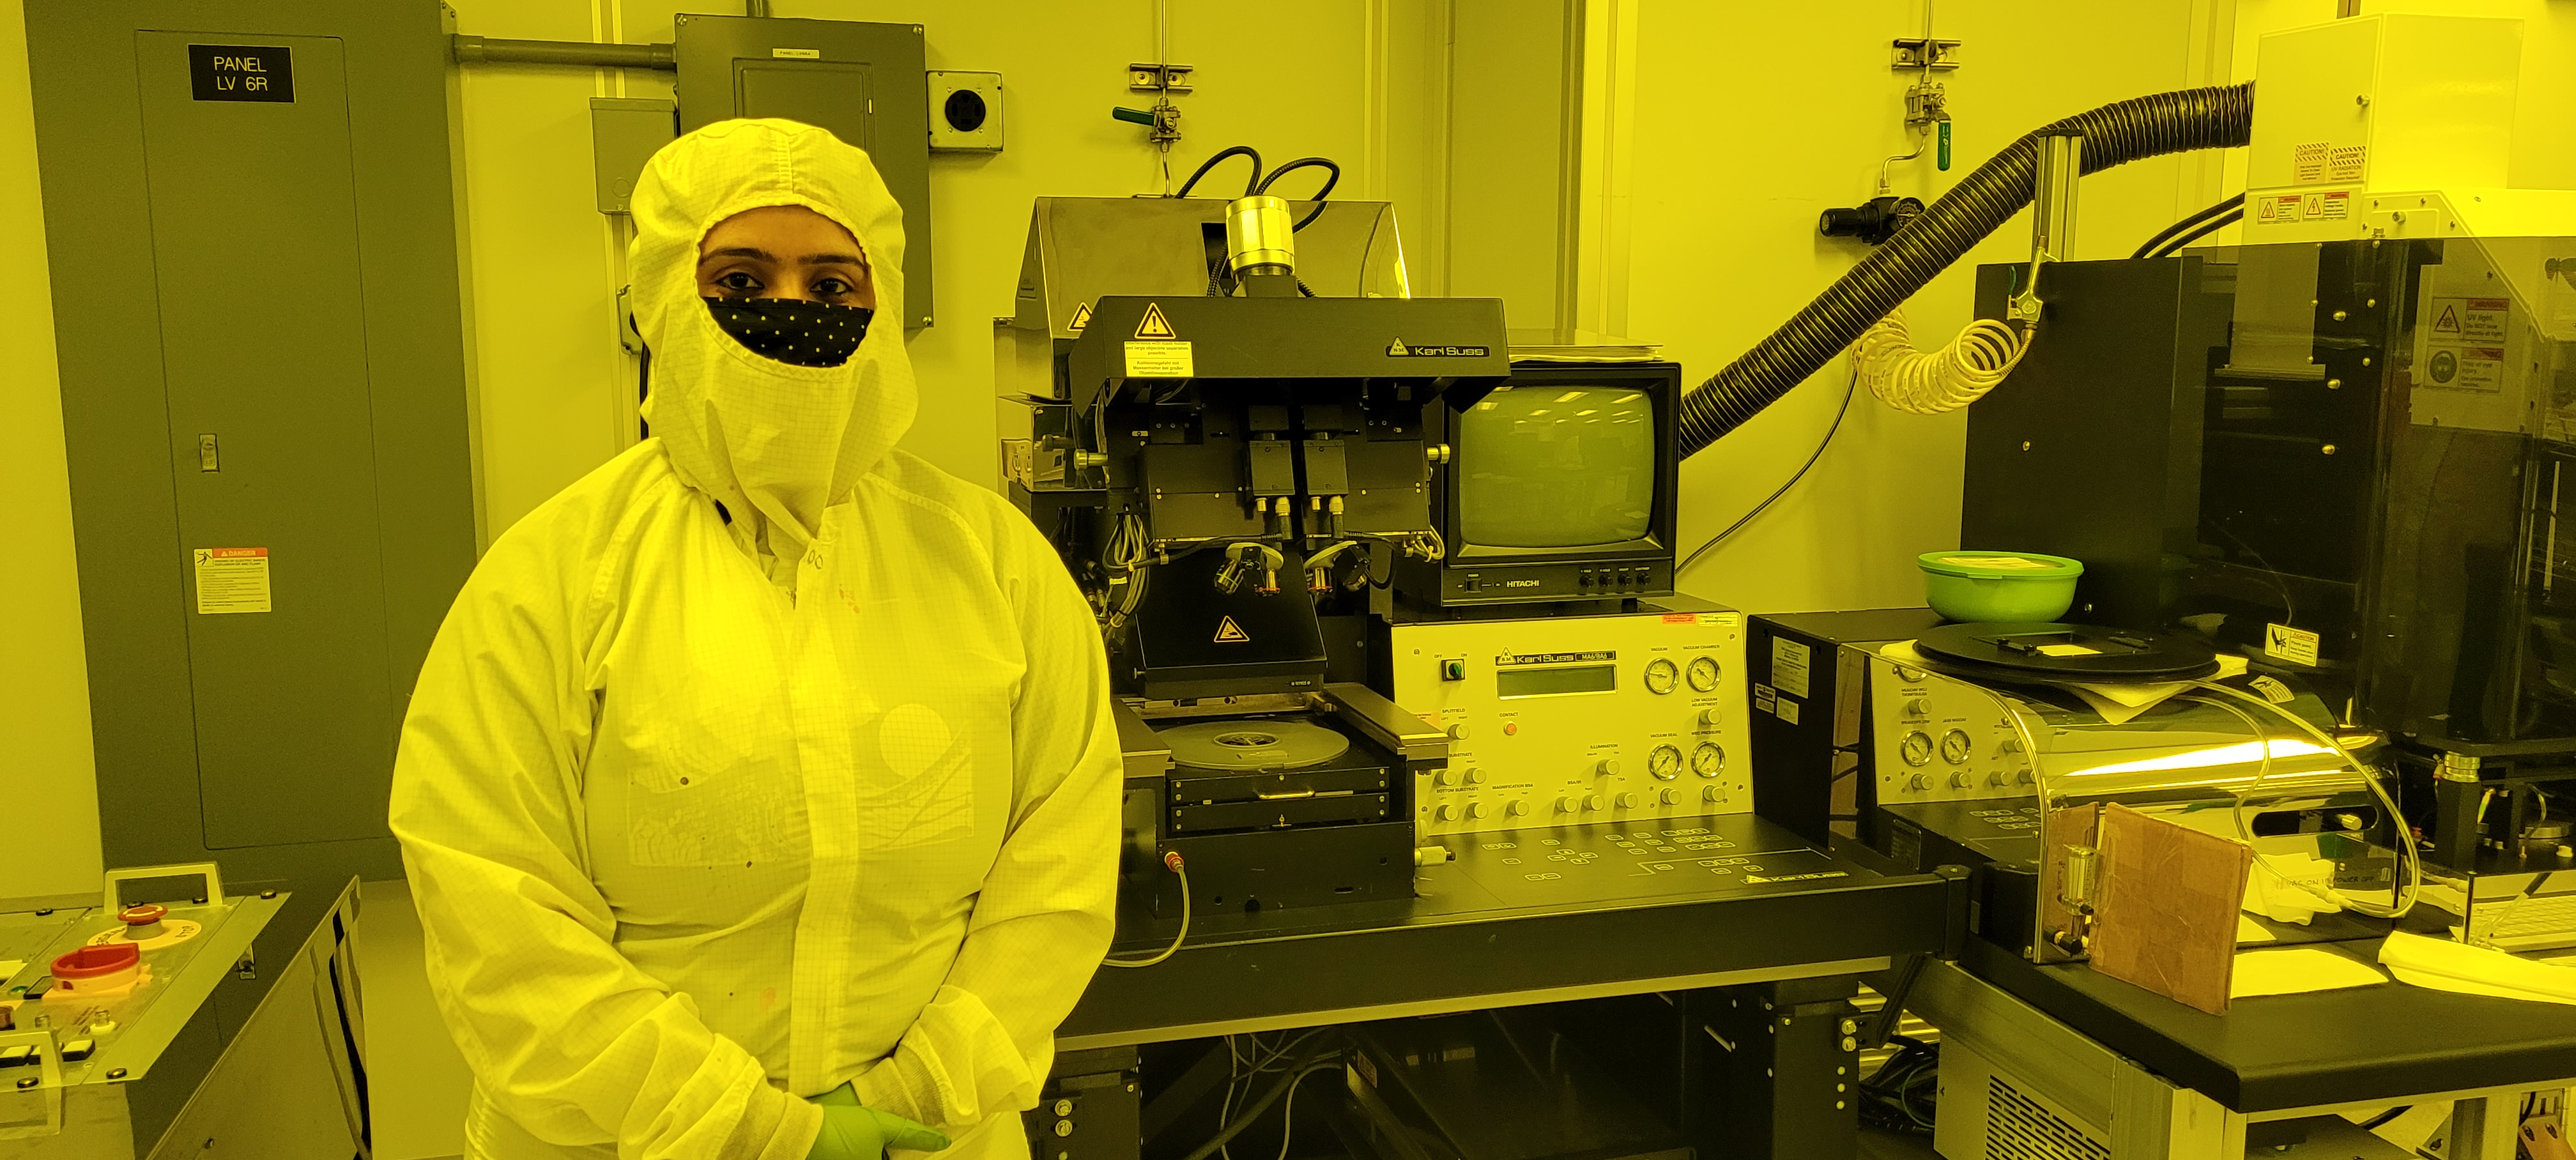 This photo shows a woman from the waist up clad in a white lab garment that covers all but her nose and eyes. She is also wearing a black face mask, so only her eyes, eyebrows, and a bit of forehead are visible. She is in a laboratory with screens, tubing, and equipment in the background of the photo.